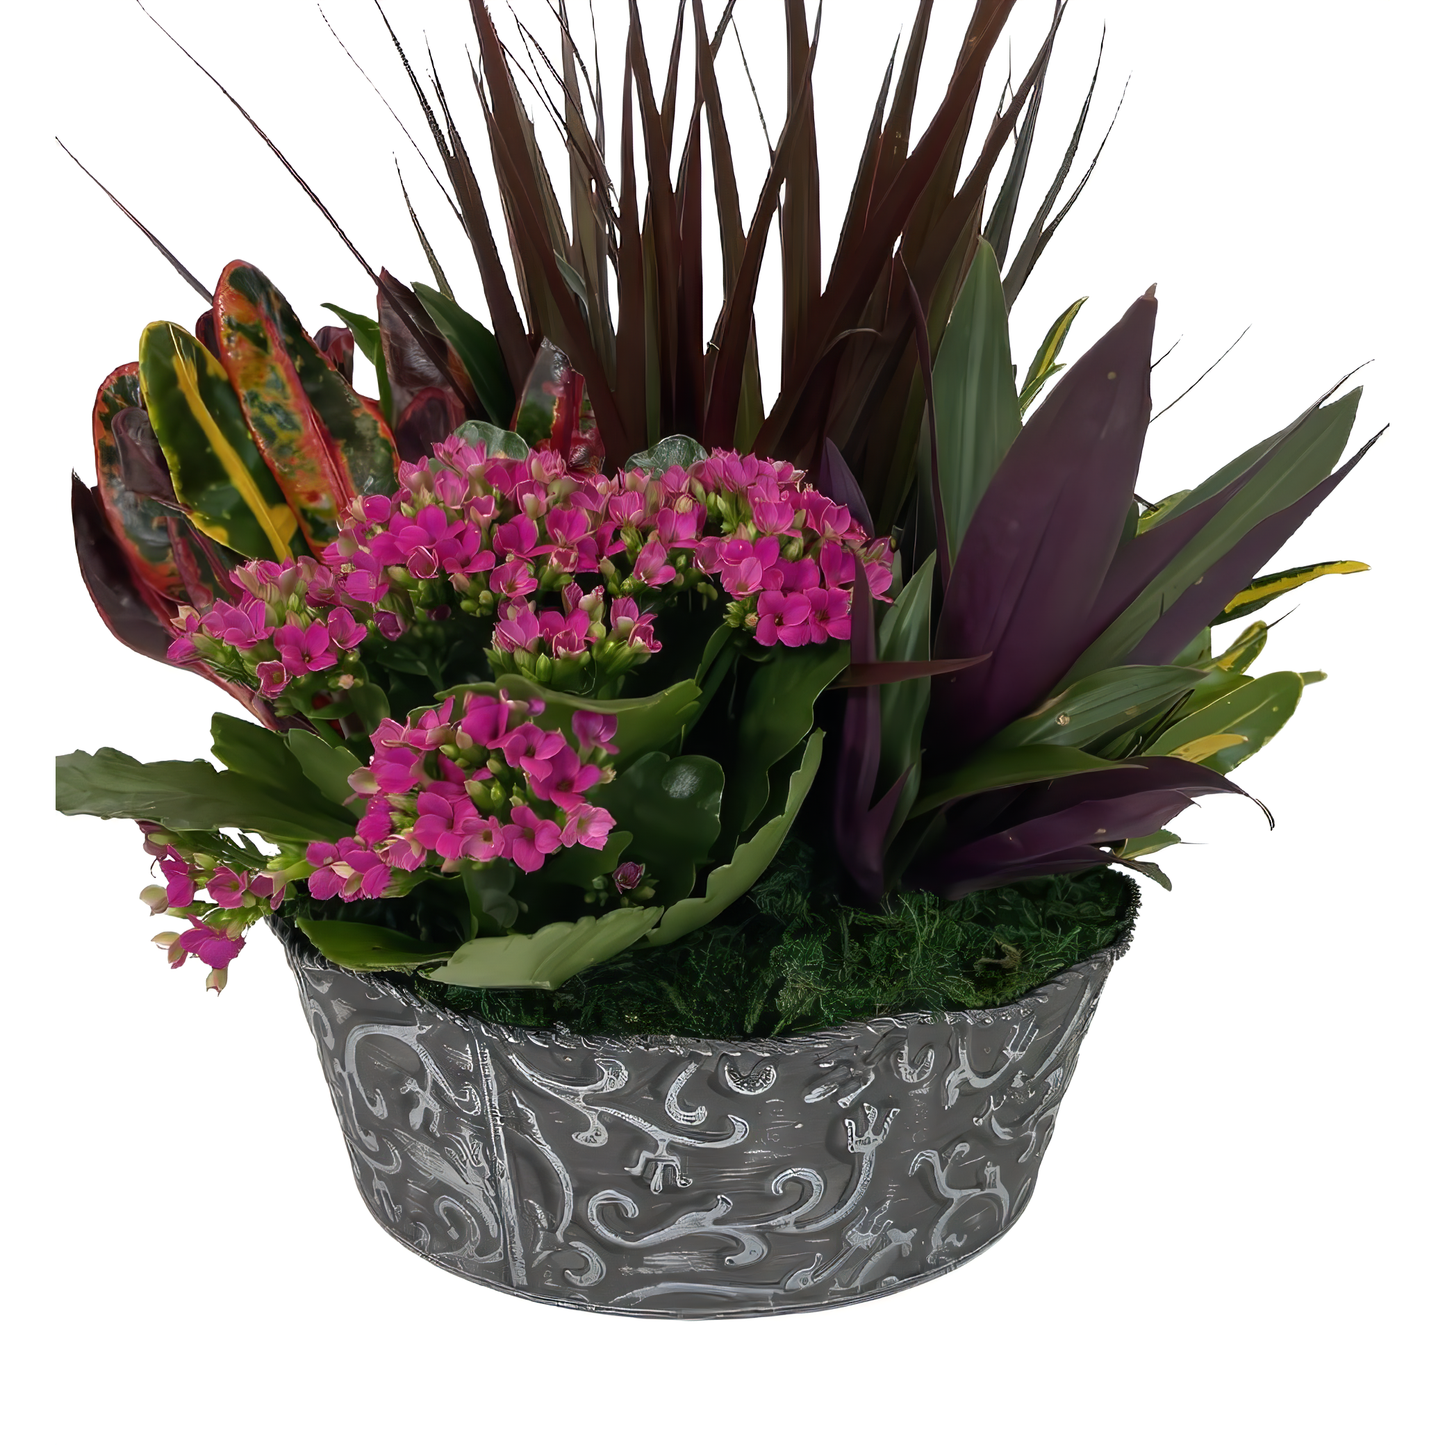 NYC Flower Delivery - Large European Dish Garden In Grey Antique Planter - Plants